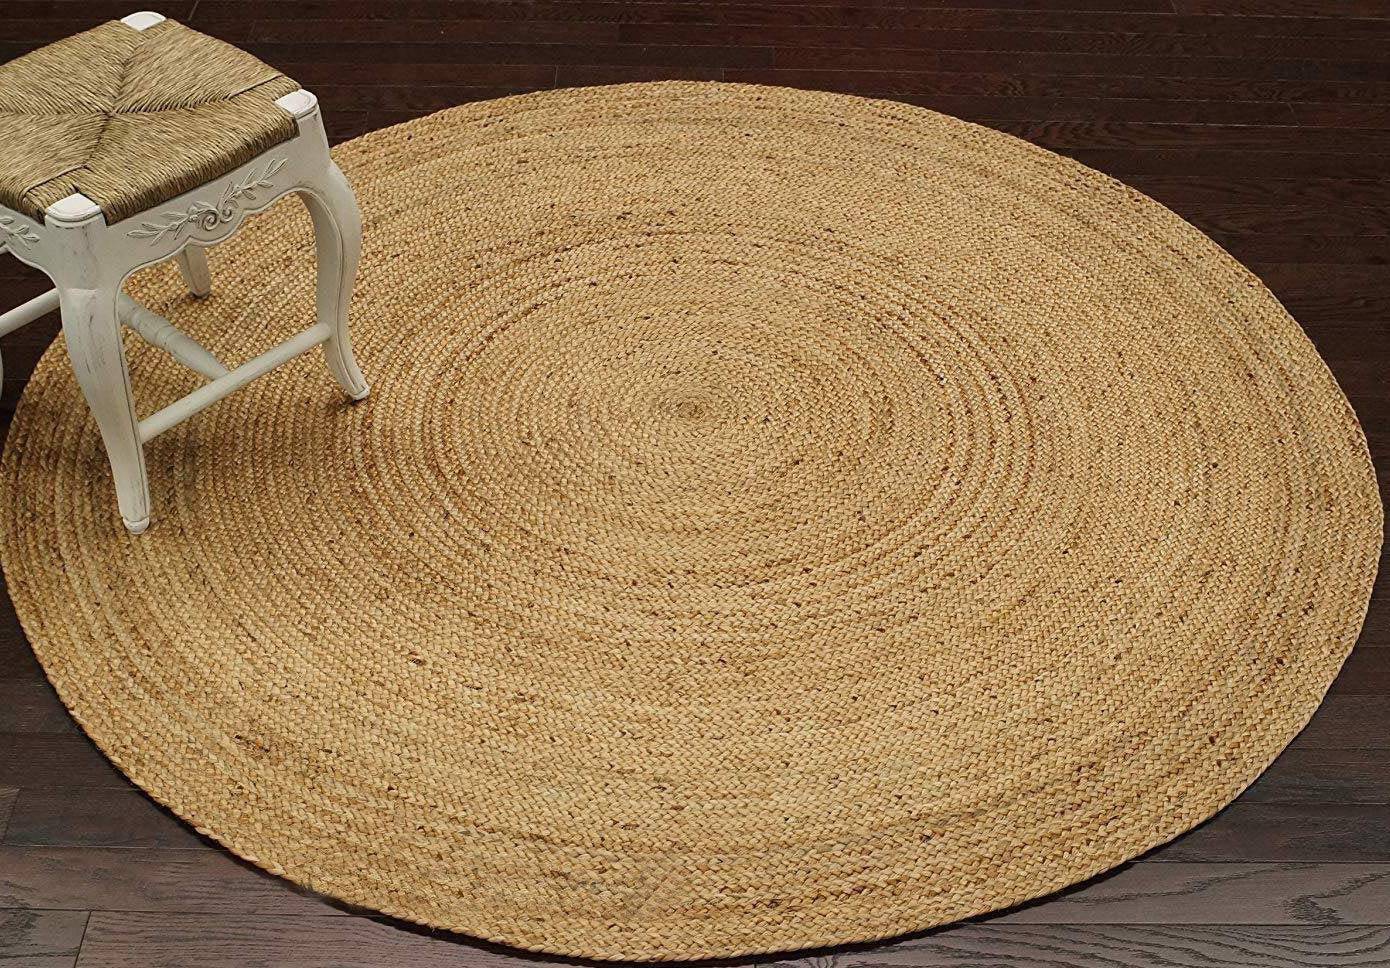 Round handwoven jute rug in a warm golden color